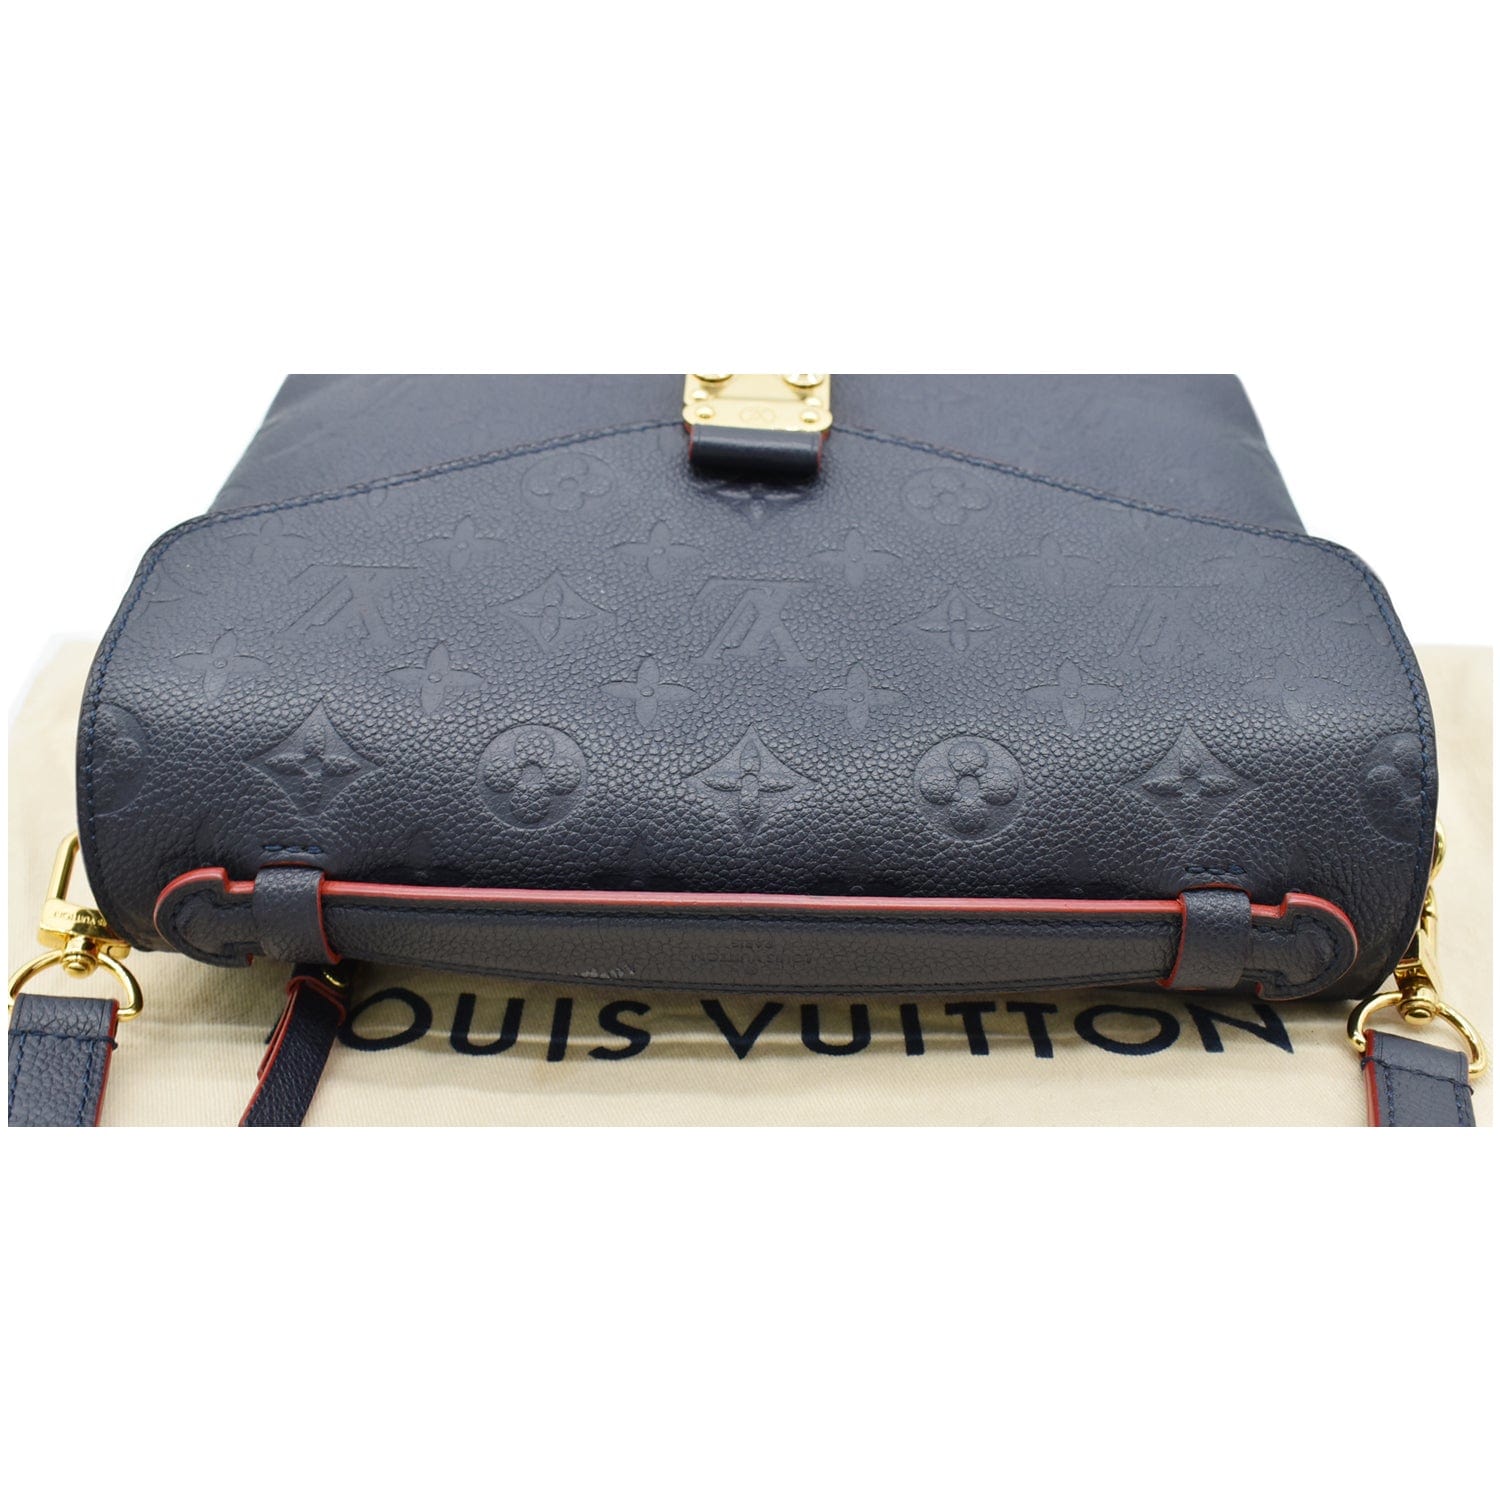 Metis leather crossbody bag Louis Vuitton Navy in Leather - 37605925